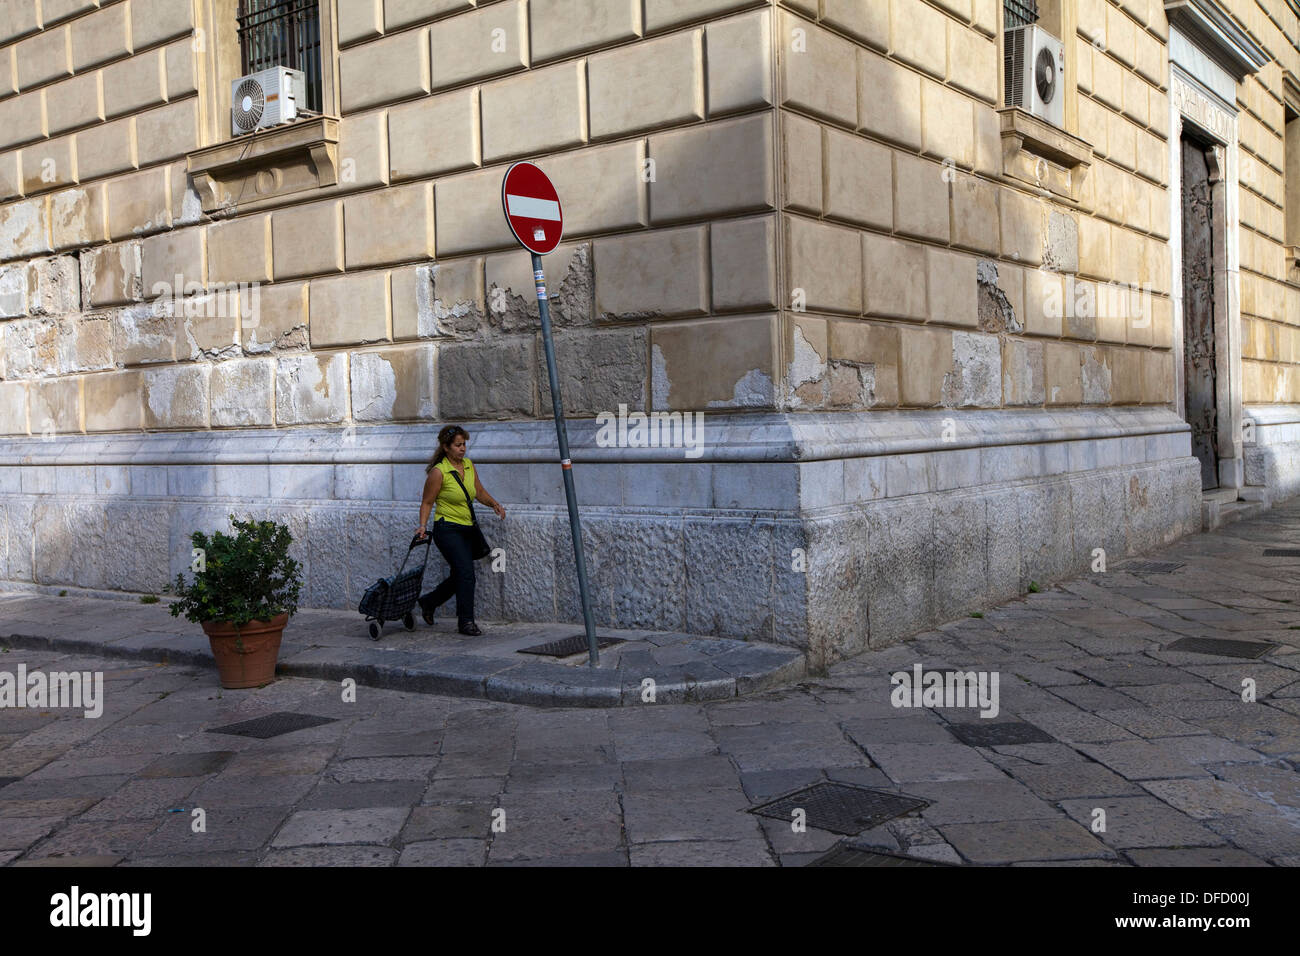 A woman wheels her shopping trolley through the Piazza Bellini, Palermo, Italy Stock Photo